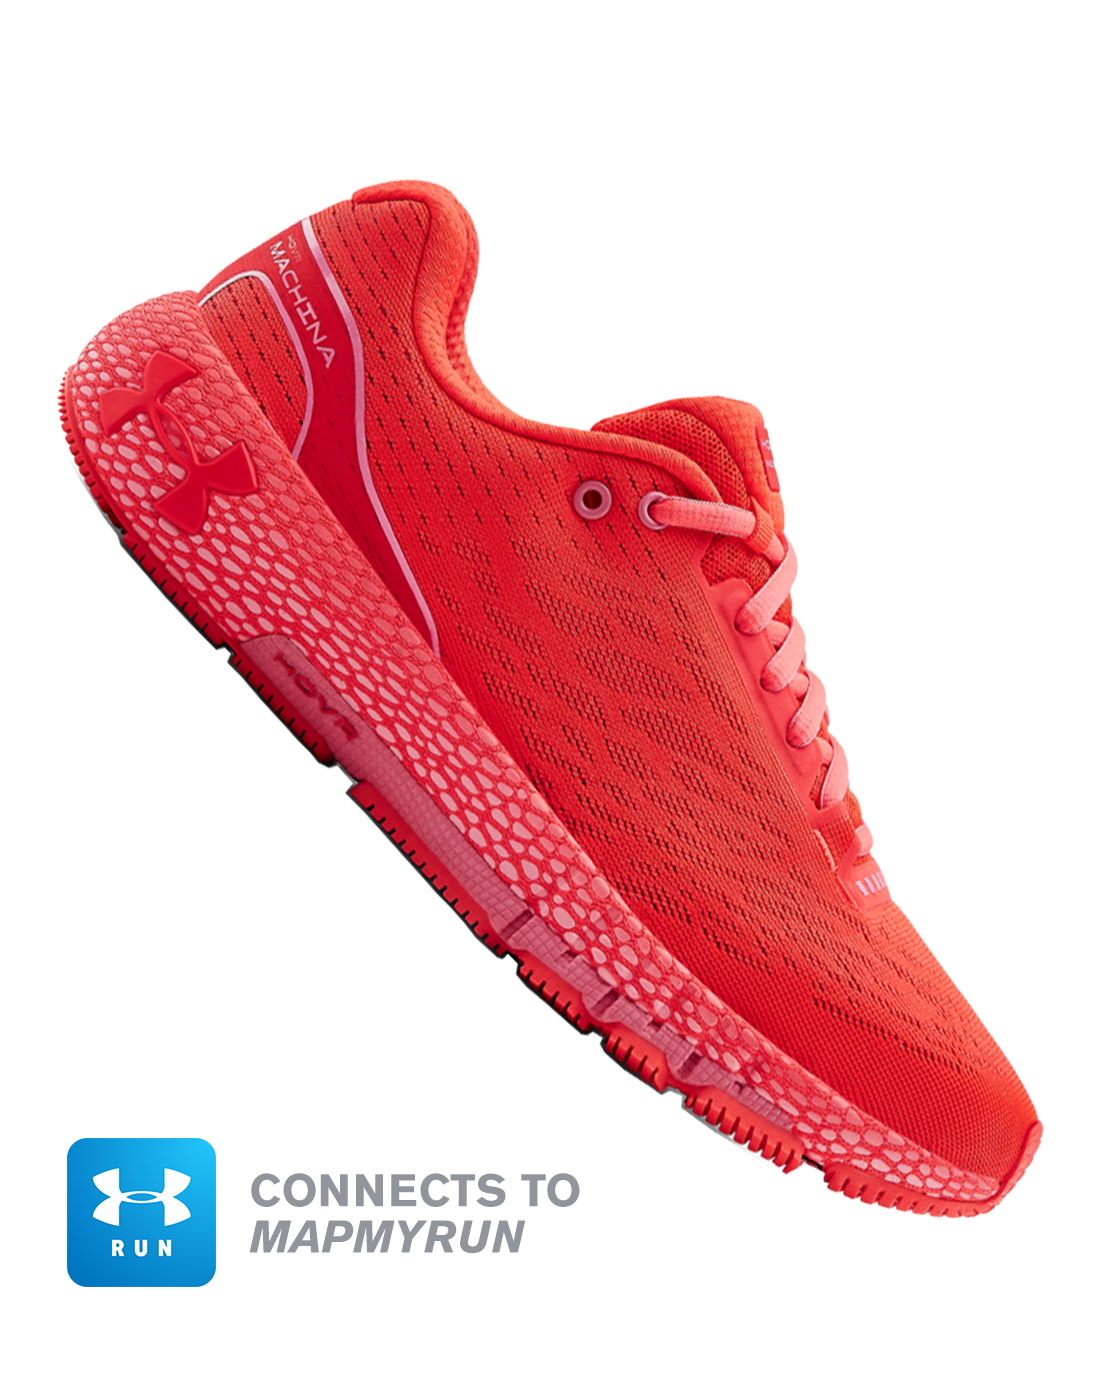 under armour smart shoes womens